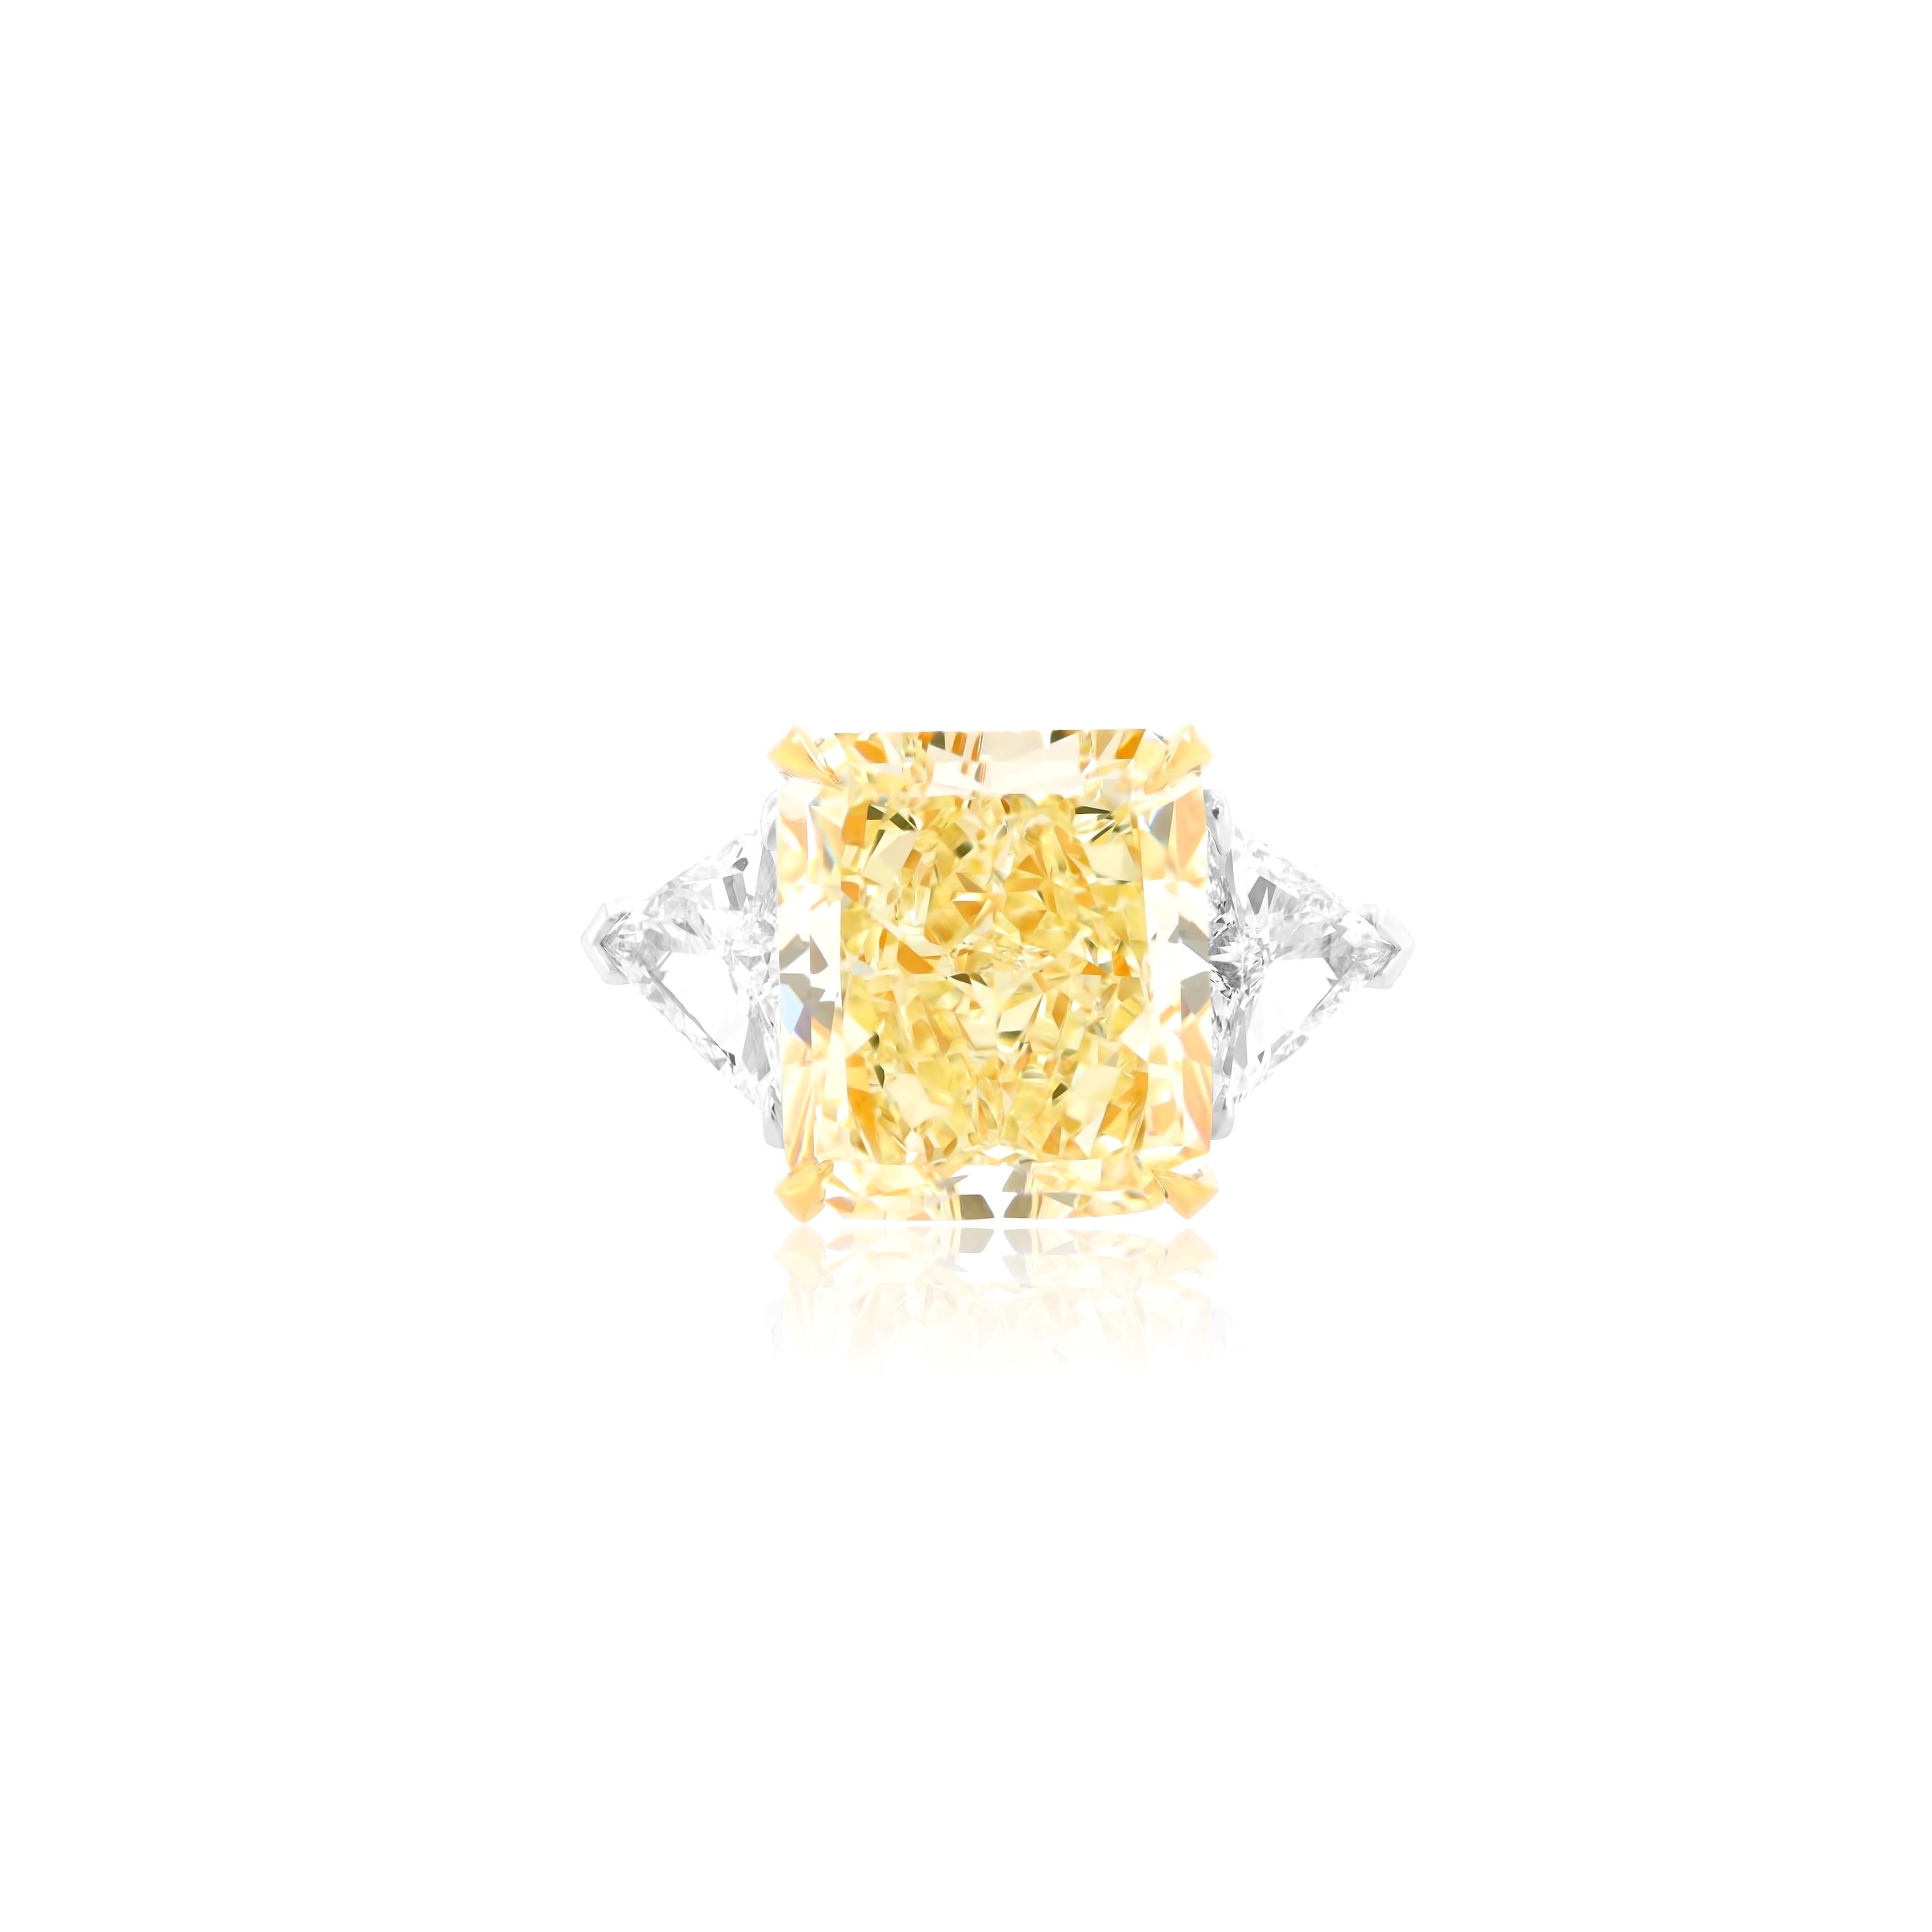 Platinum and 18 kt yellow gold engagement ring featuring a center 12.14 ct GIA certified (FY VS1) yellow diamond(# 5222881733) with 1.70 cts tw of trillions on the side
Diana M is one-stop shop for all your jewelry shopping, carrying line of diamond